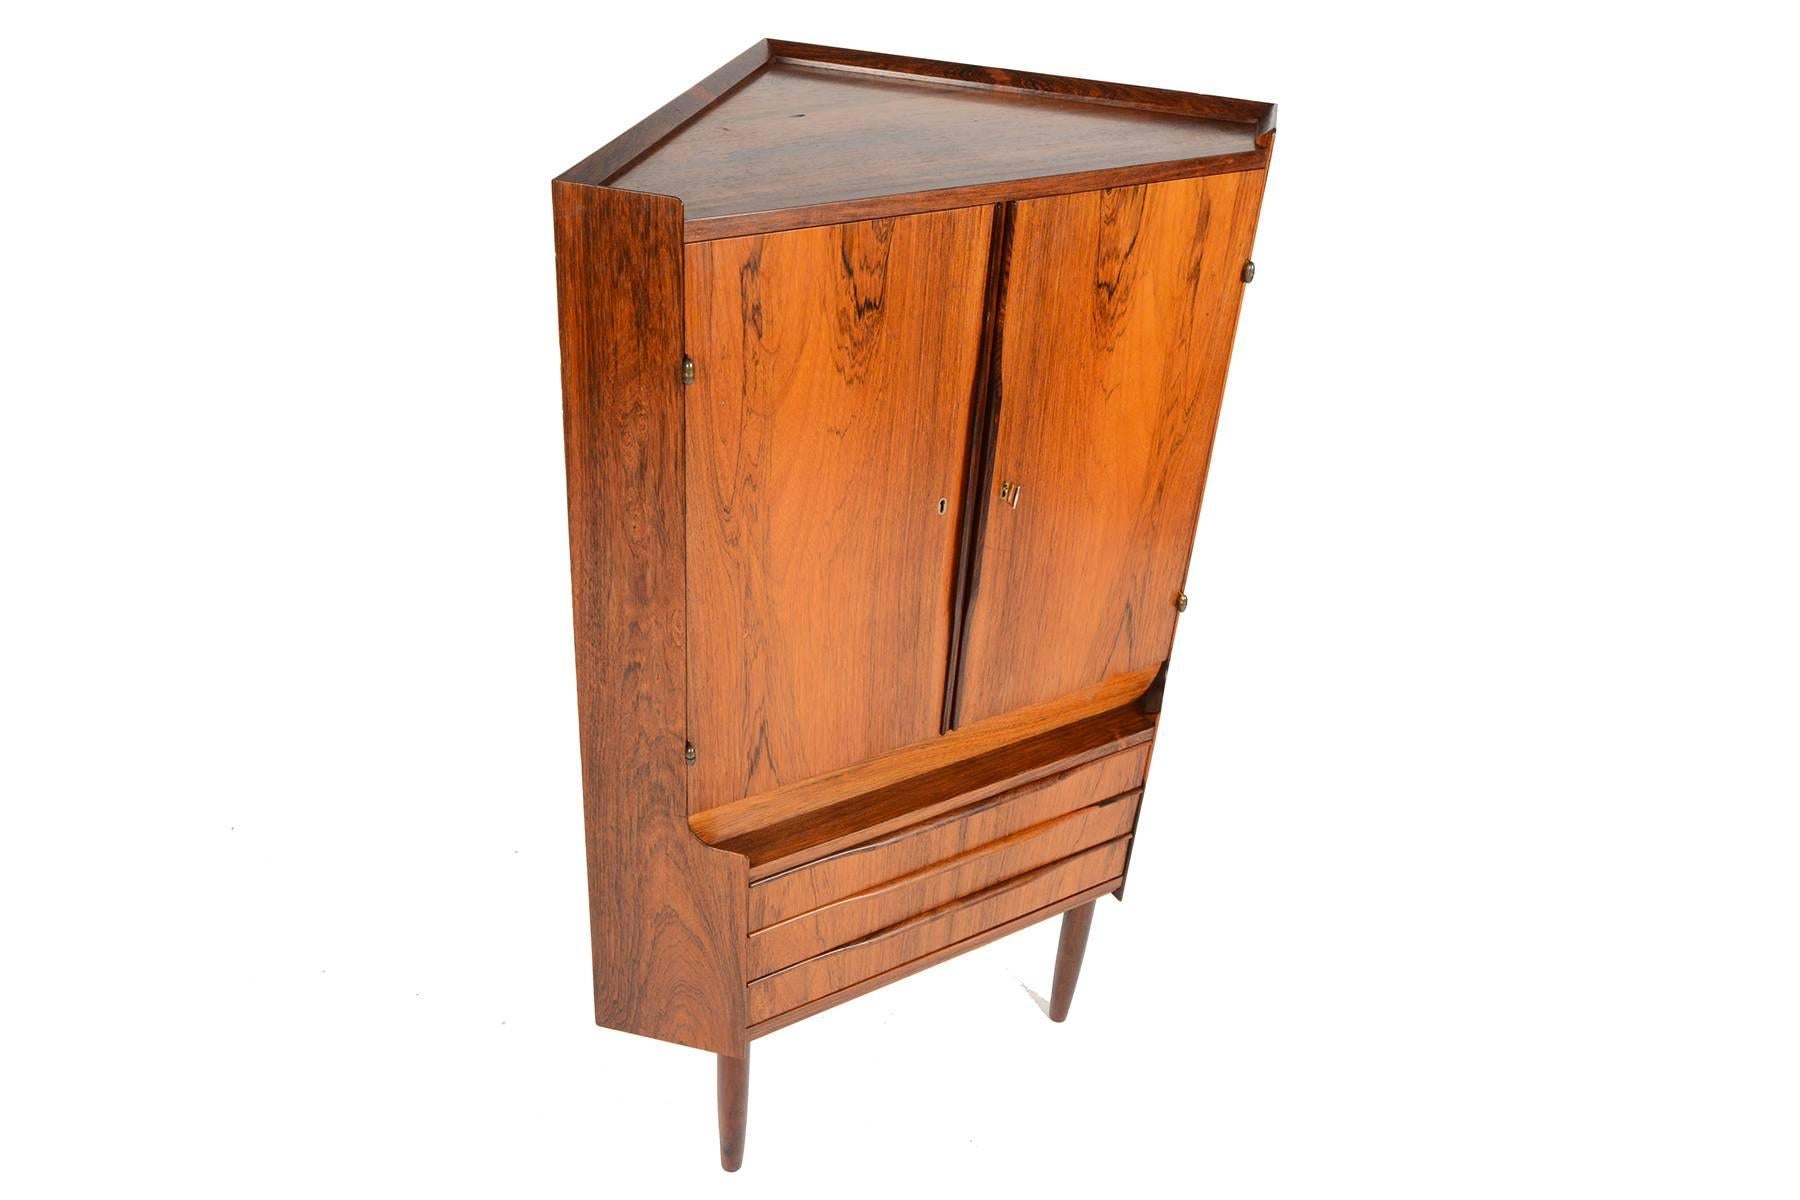 This Danish modern mid century corner cabinet and bar is perfect for any space with limited storage. Crafted in Brazilian rosewood, this piece will tuck easily into any corner of your home, providing you with a ready to use dry bar! Two top locking